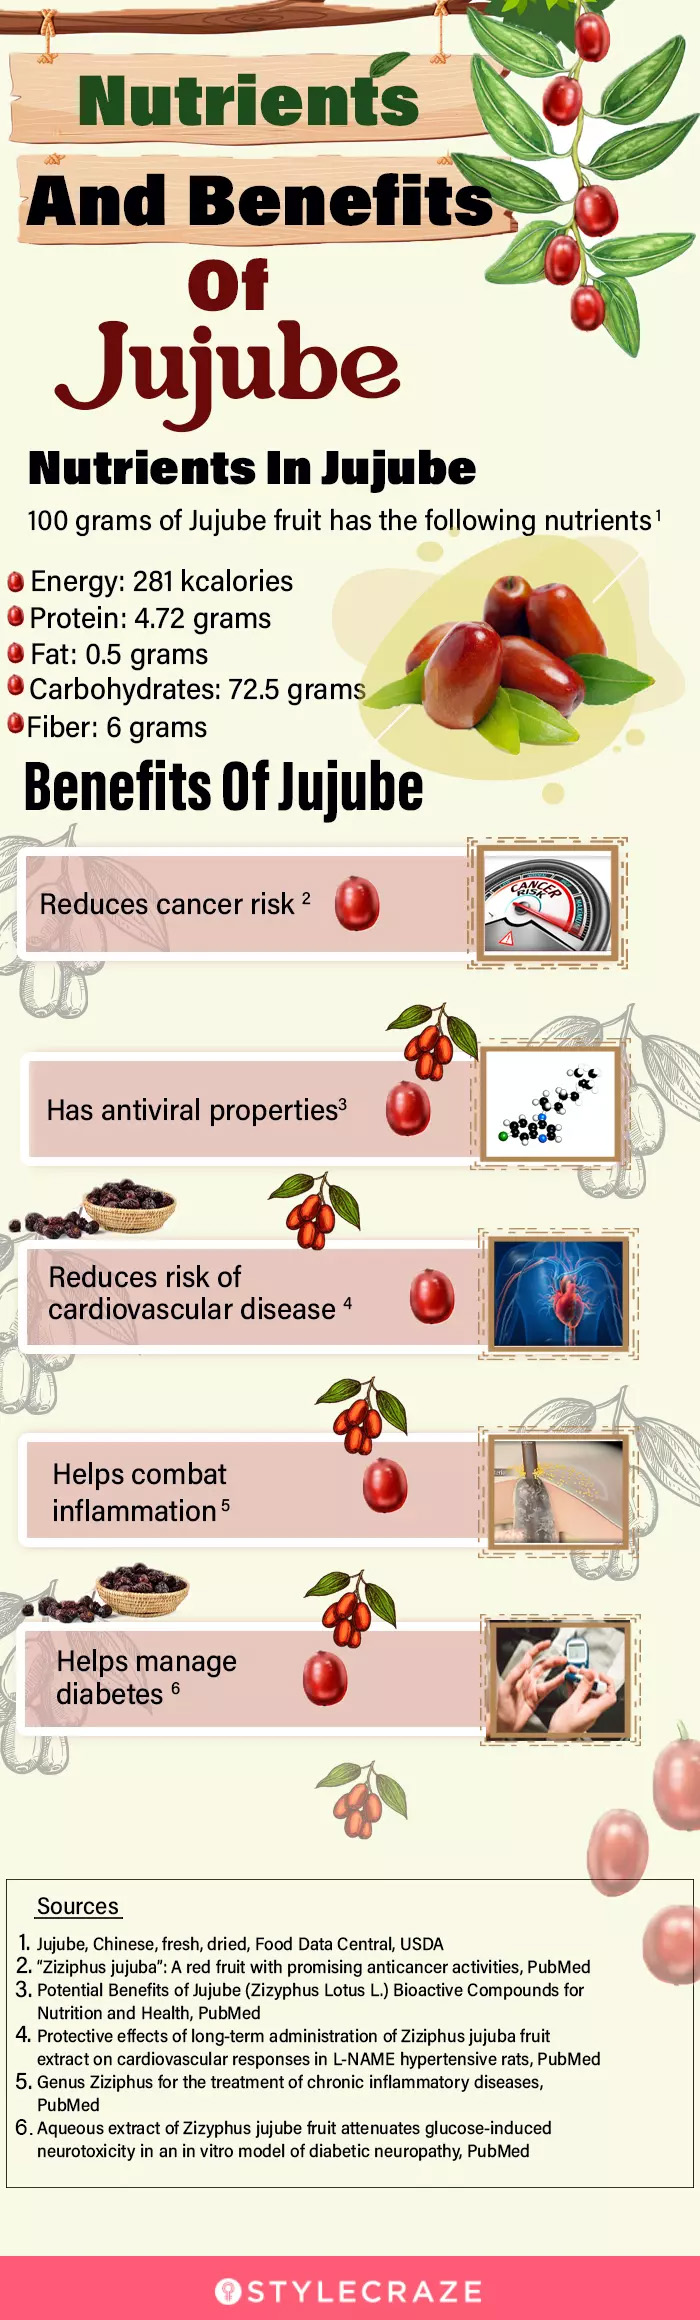 nutrients and benefits of jujube (infographic)